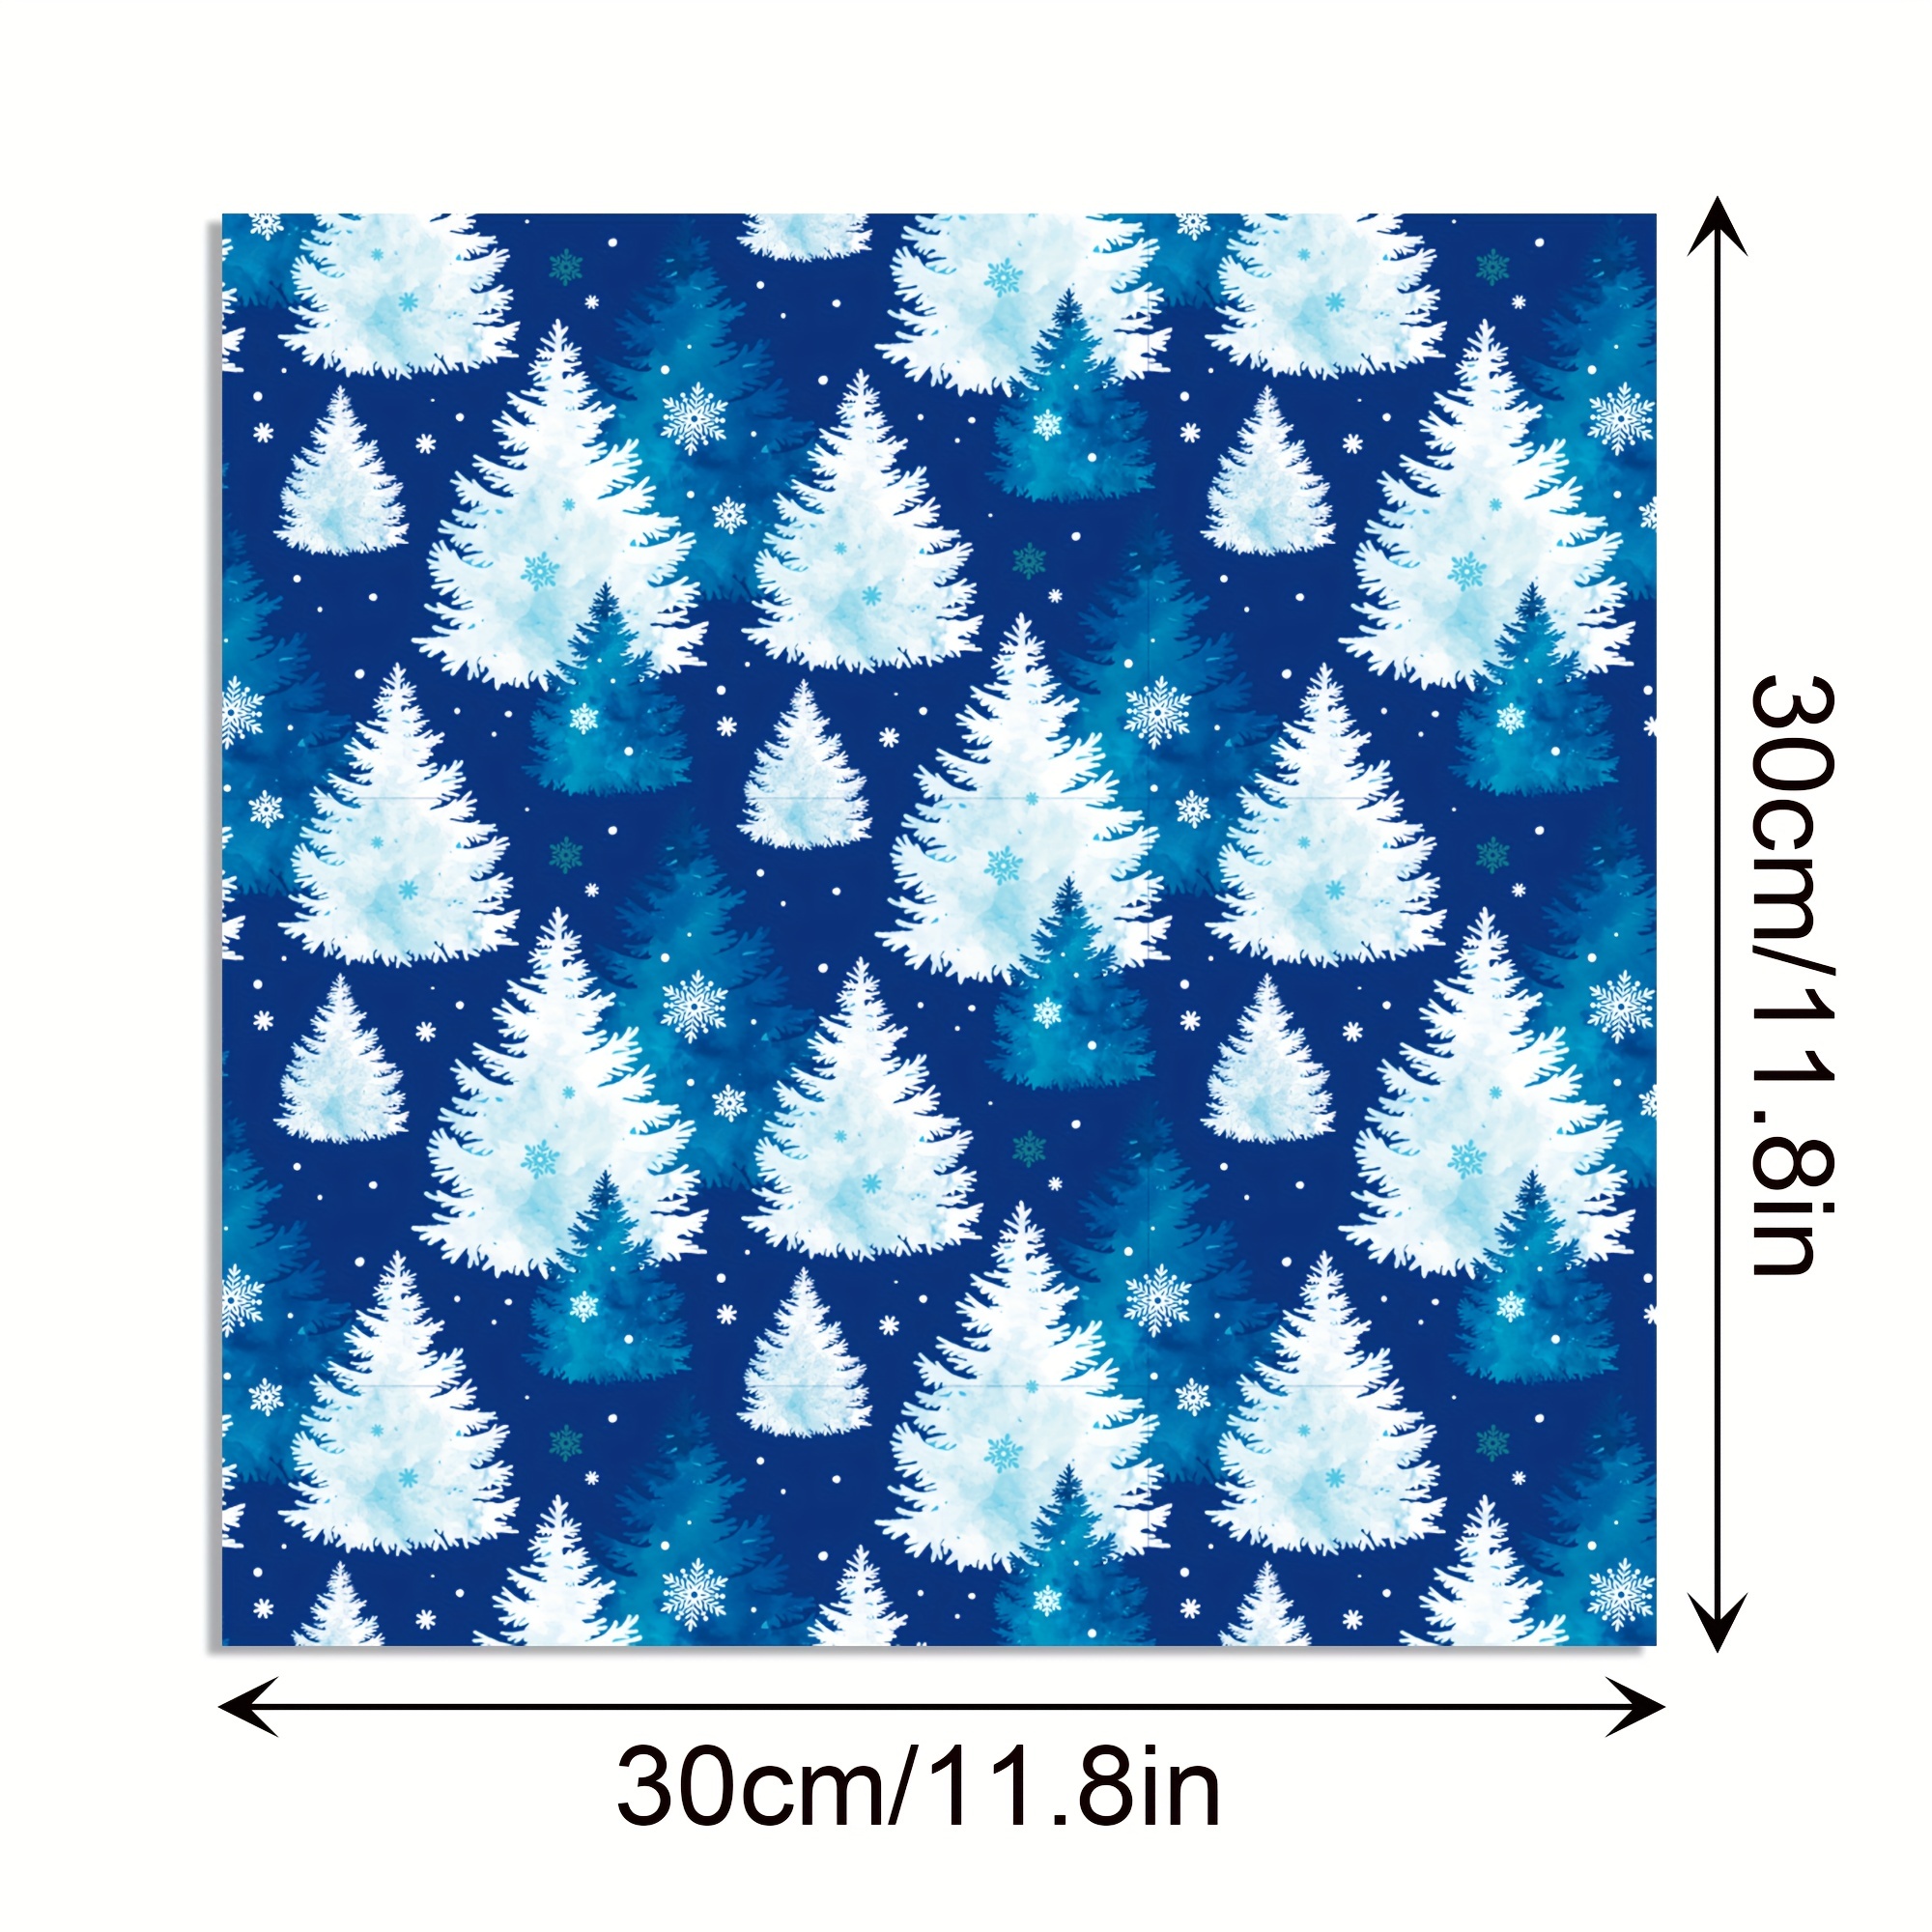 Sparkling Swirl Tree - Blue Christmas - 12x12 Scrapbook Papers by Ella